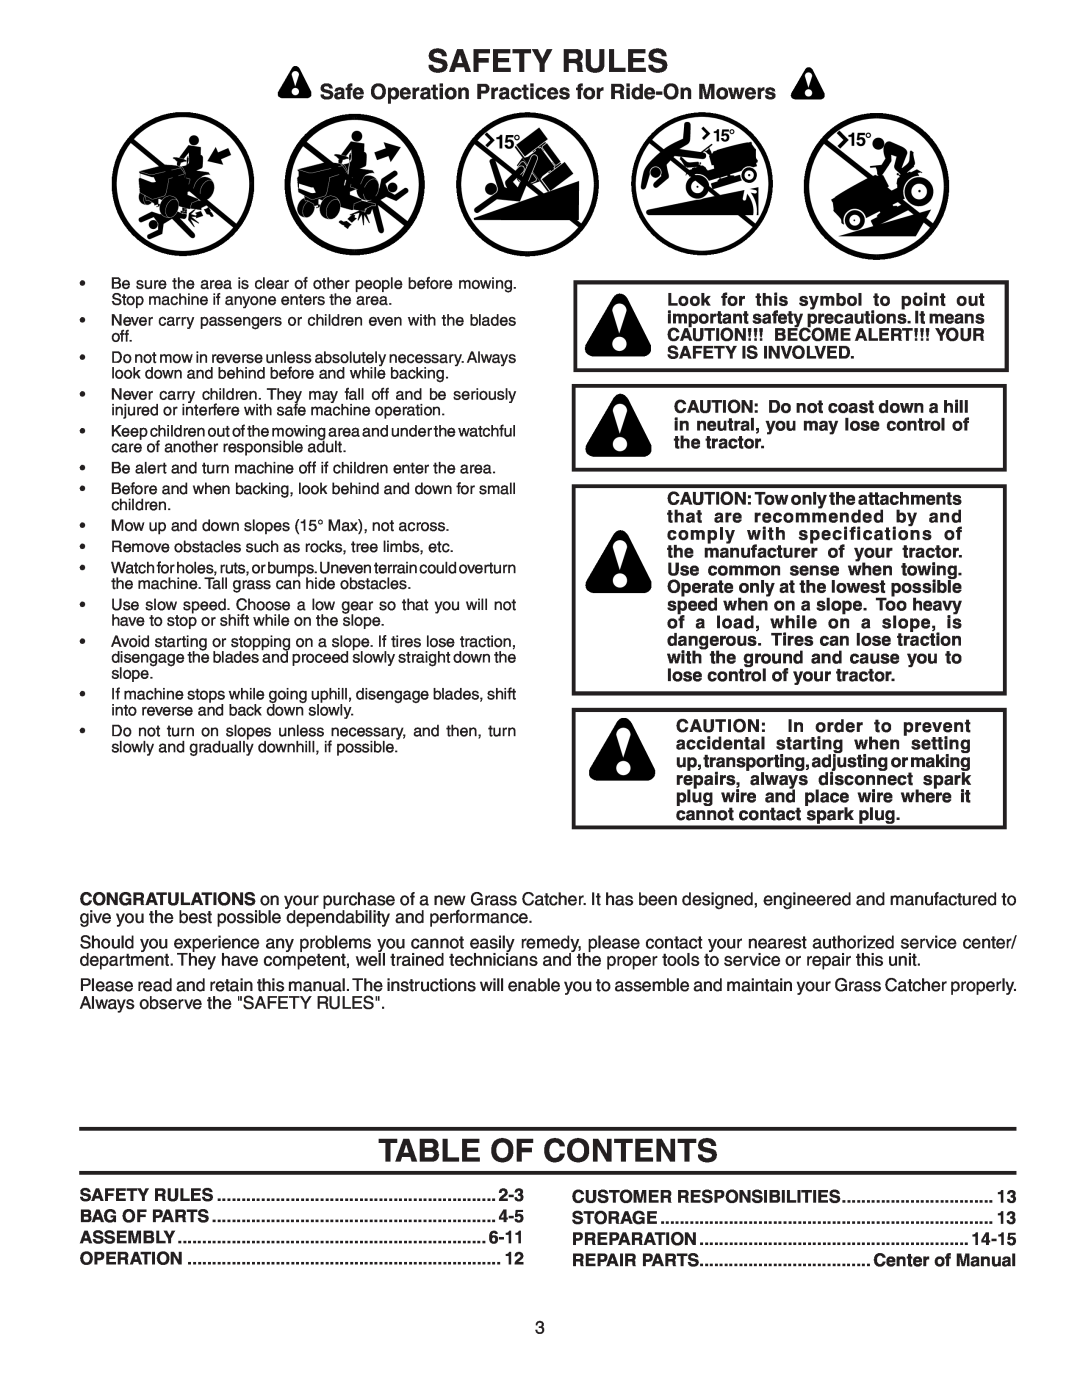 Poulan C342B, 954 04 05-03, 156235 owner manual Table Of Contents, Safety Rules, Safe Operation Practices for Ride-OnMowers 